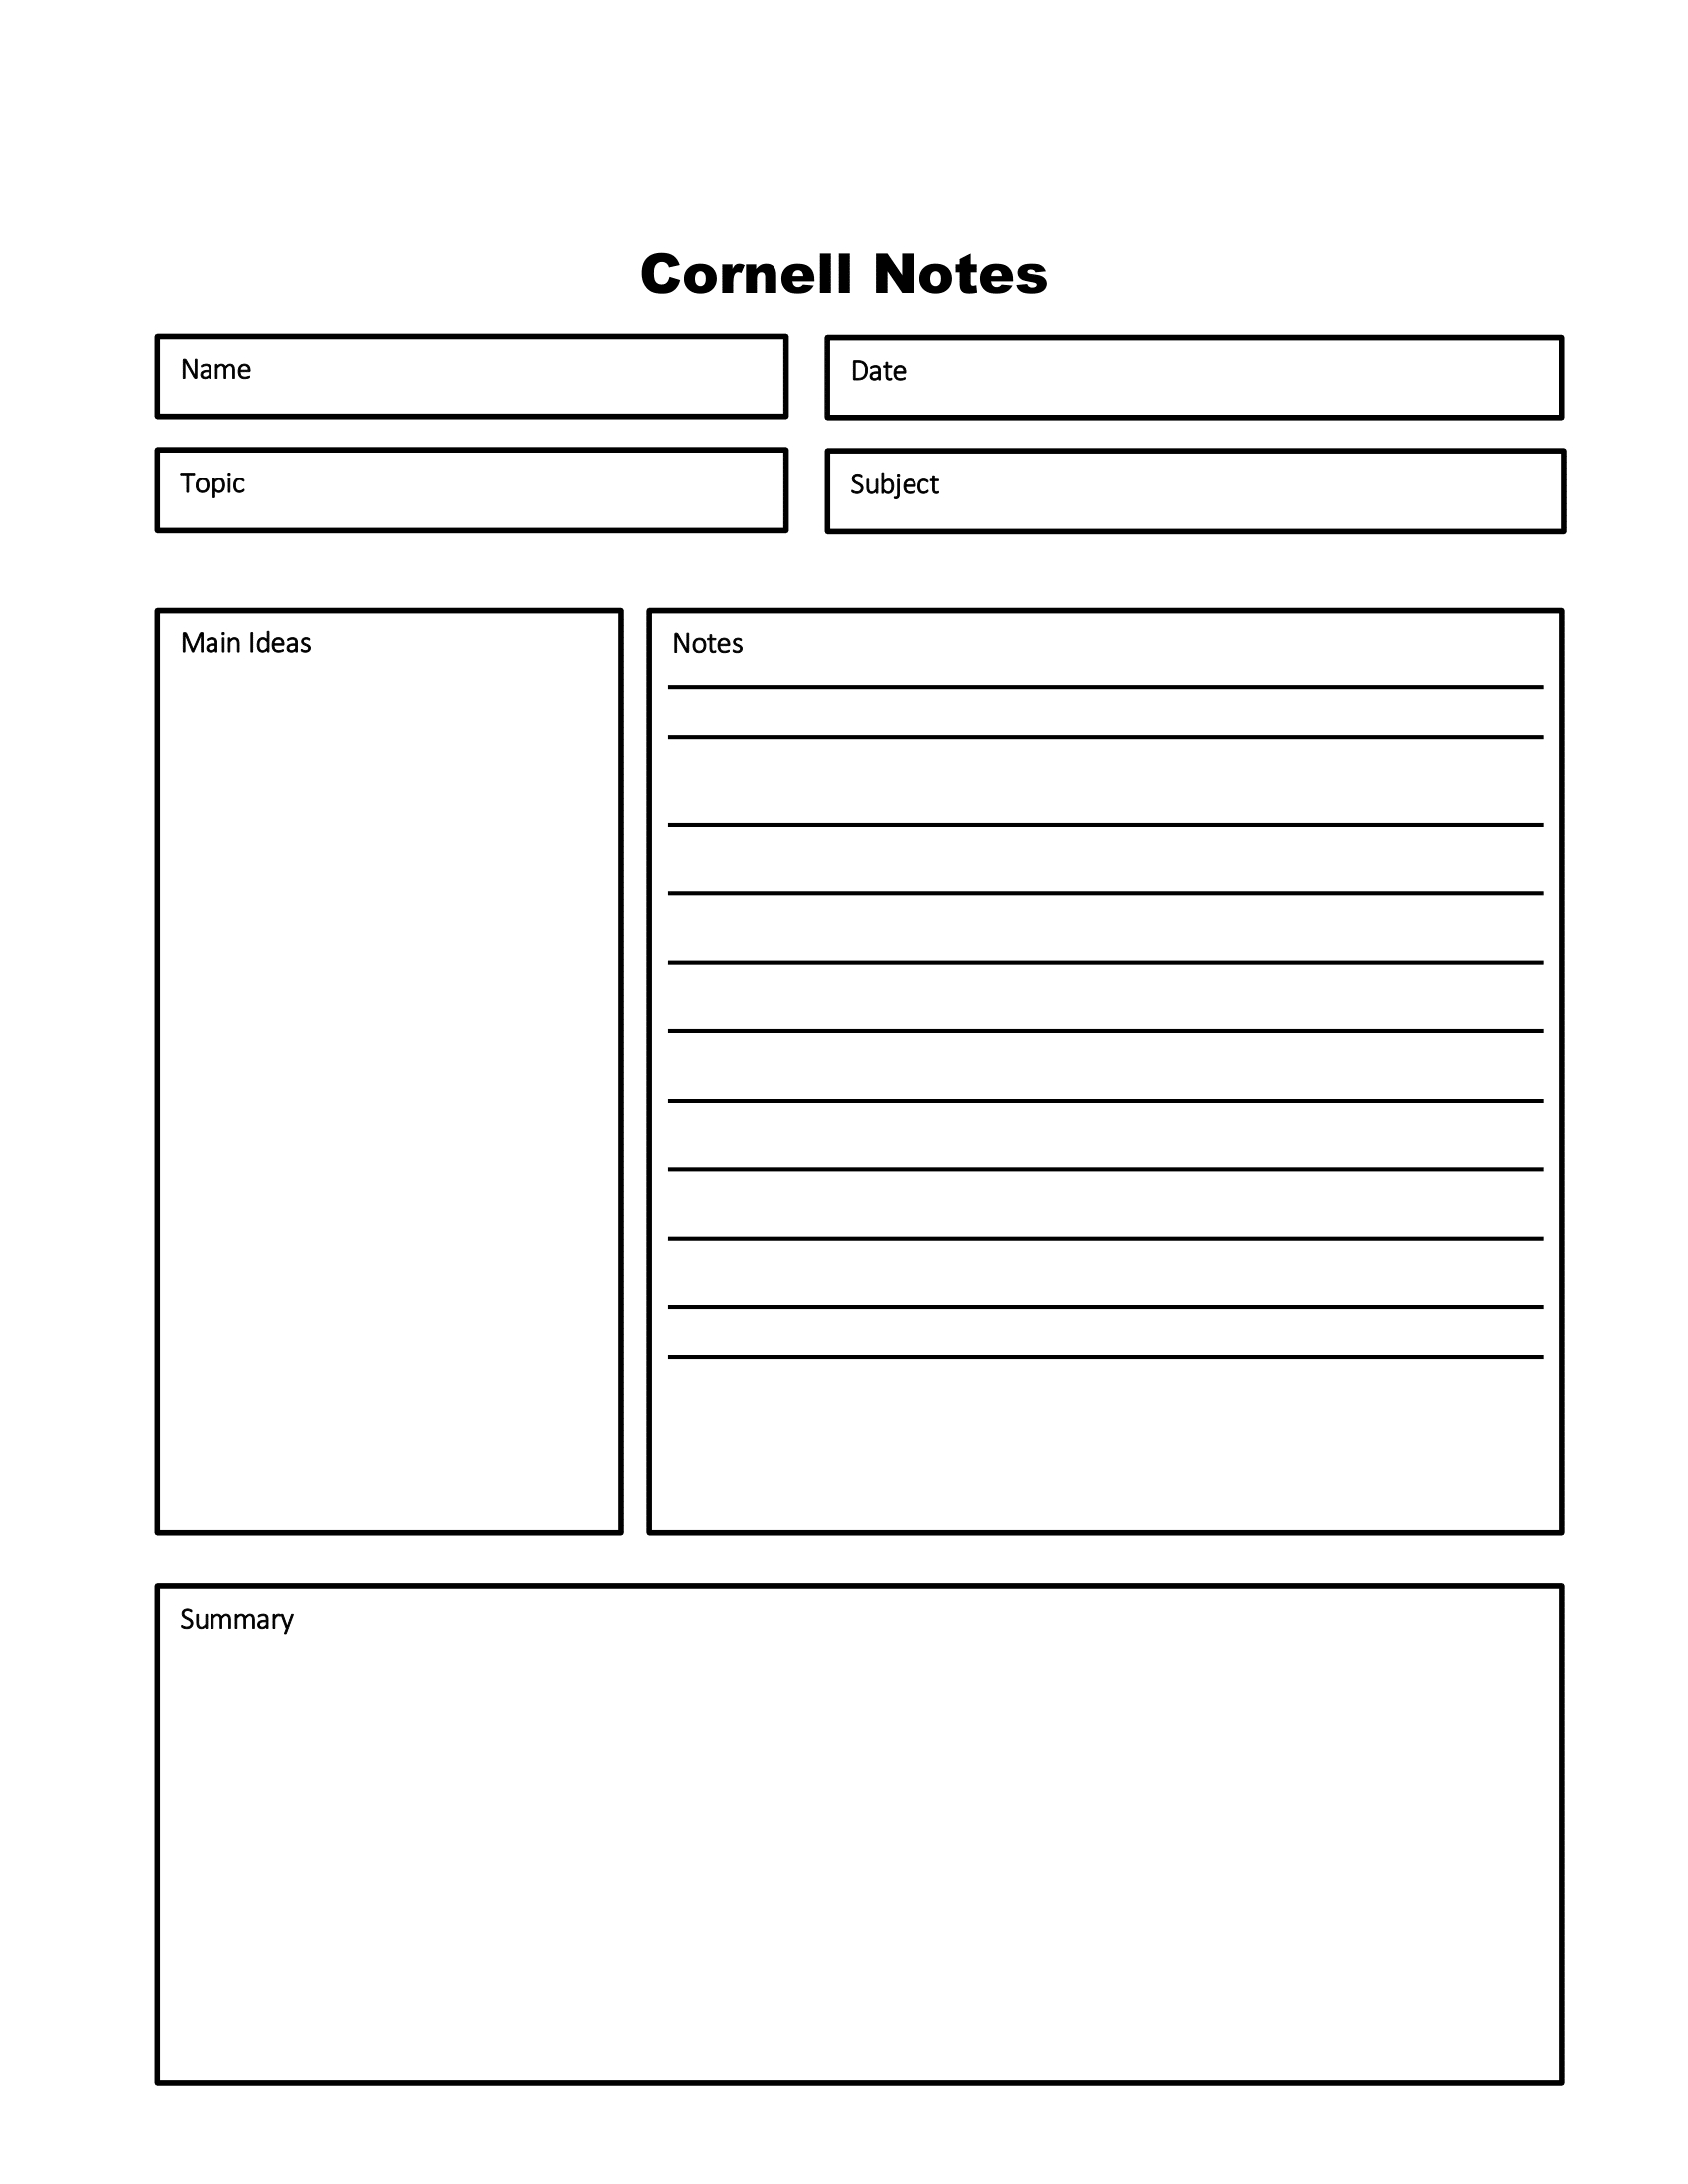 https://printabletree.com/wp-content/uploads/Cornell-Notes-Template.png